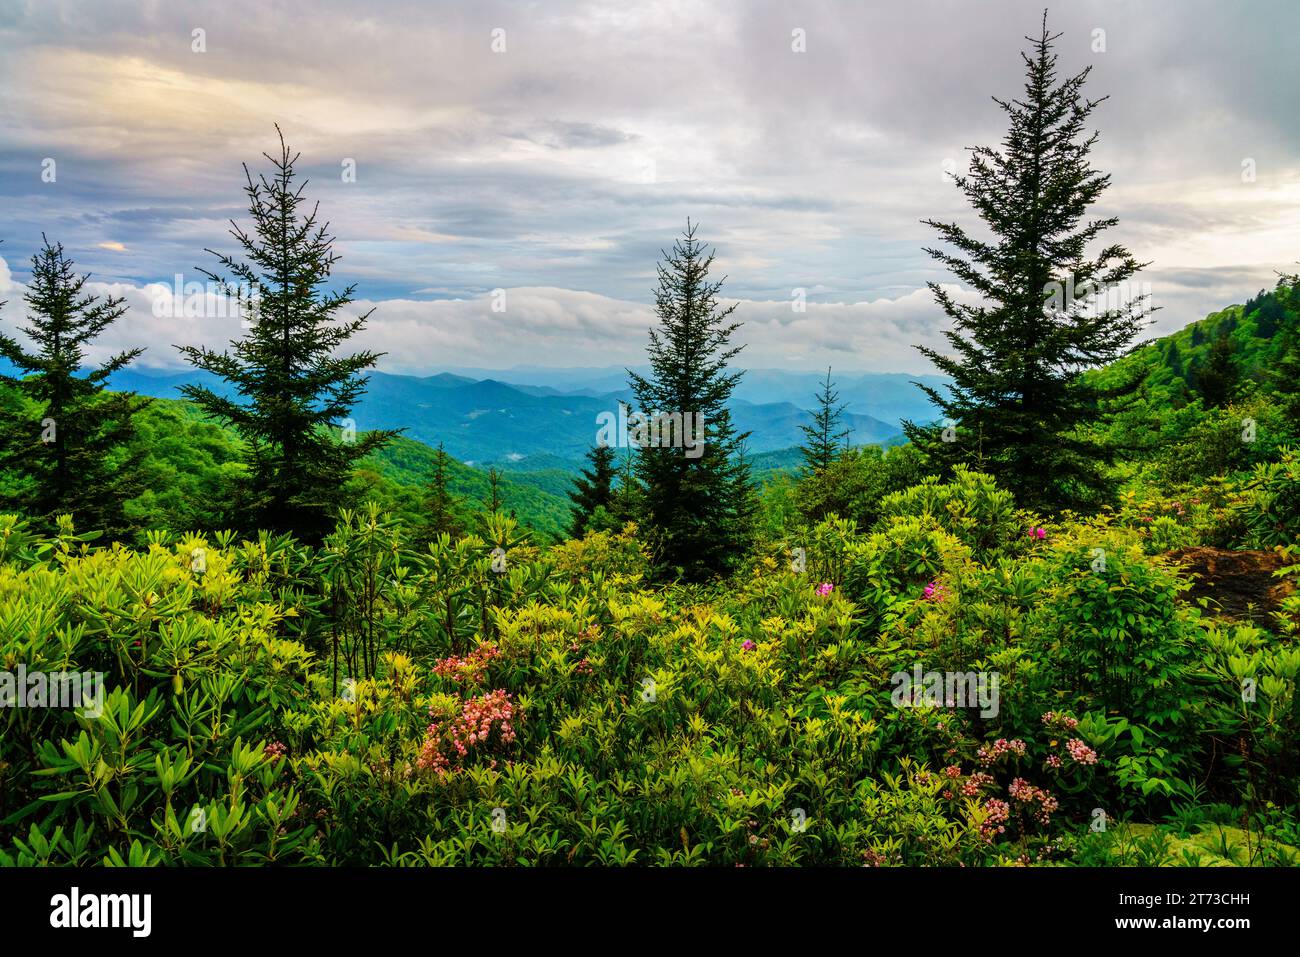 Scenic view of the Smokie Mountains from Blue Ridge Parkway near Maggie Valley, North Carolina Stock Photo